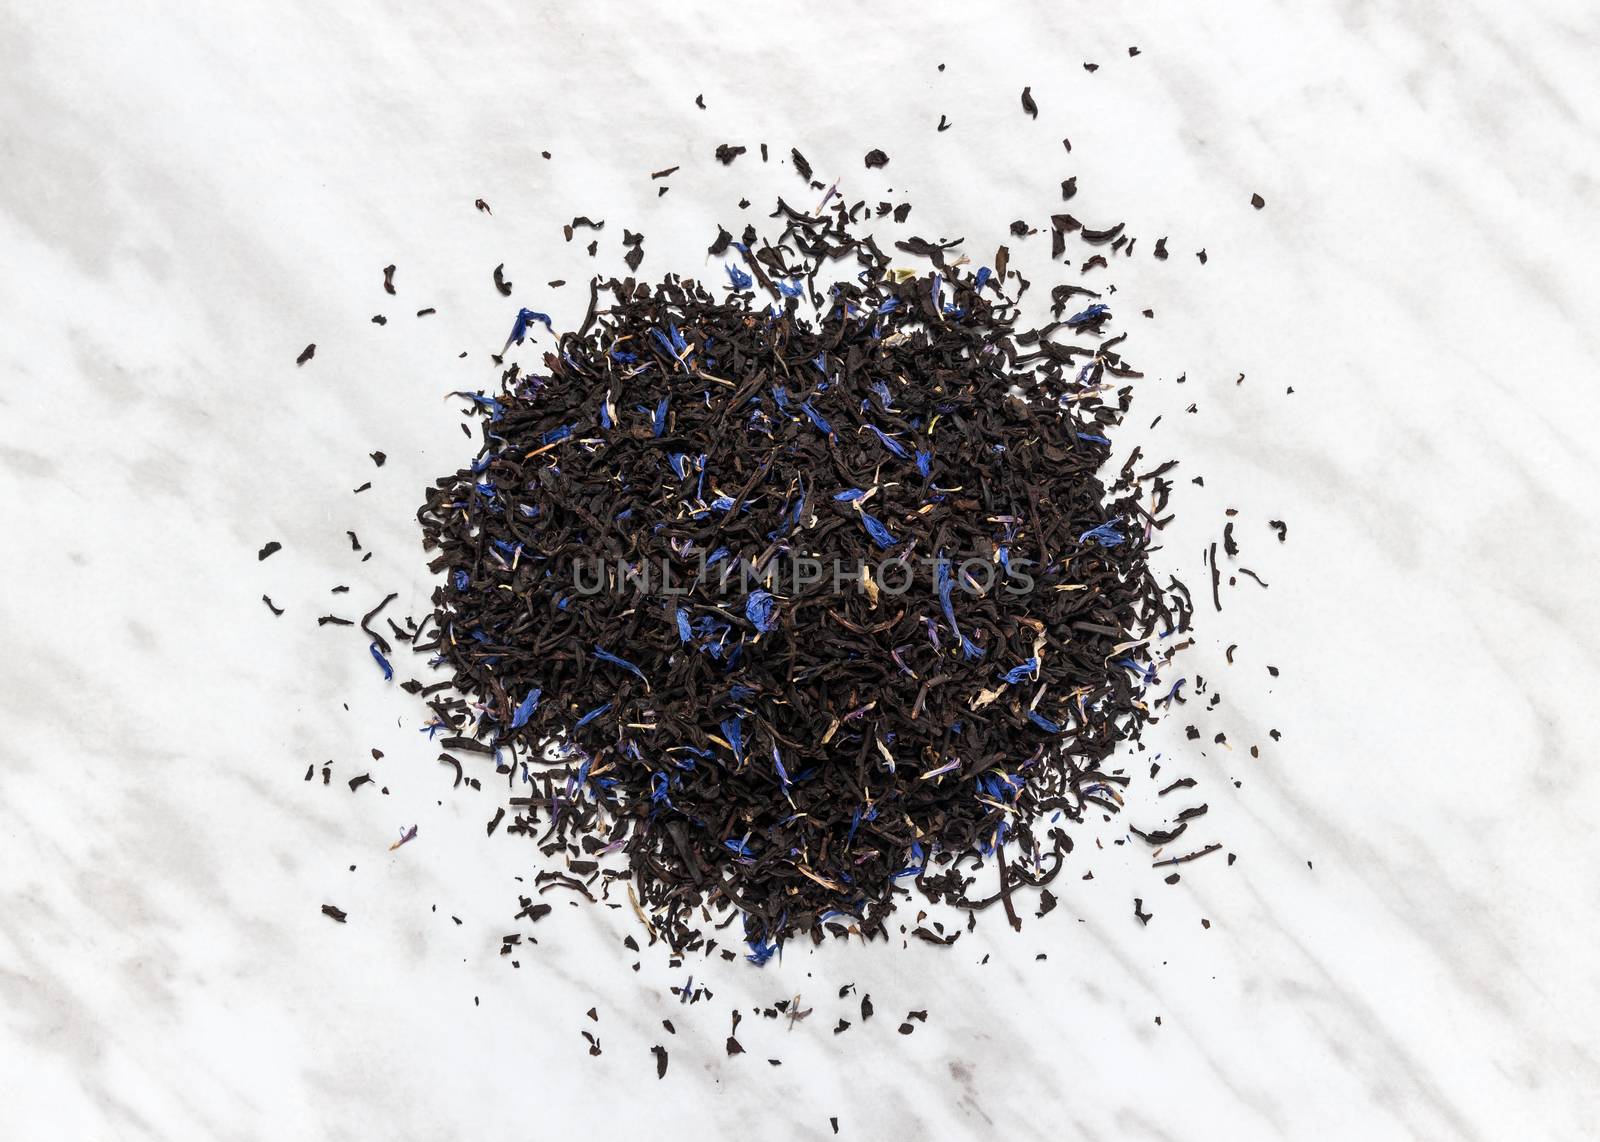 High quality black Earl gray tea leaves on marble background.